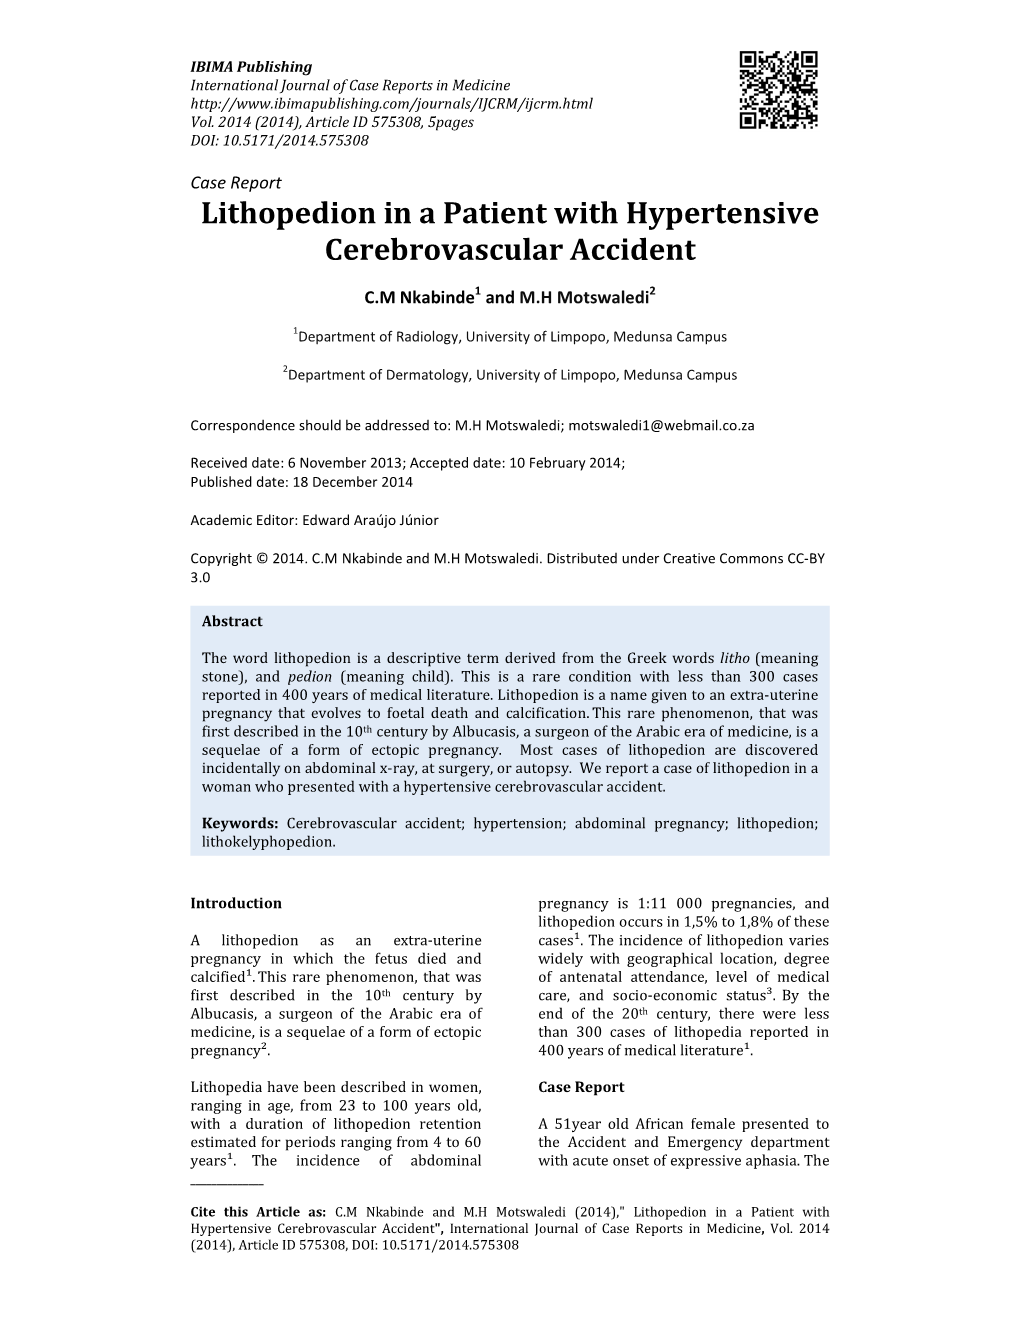 Lithopedion in a Patient with Hypertensive Cerebrovascular Accident